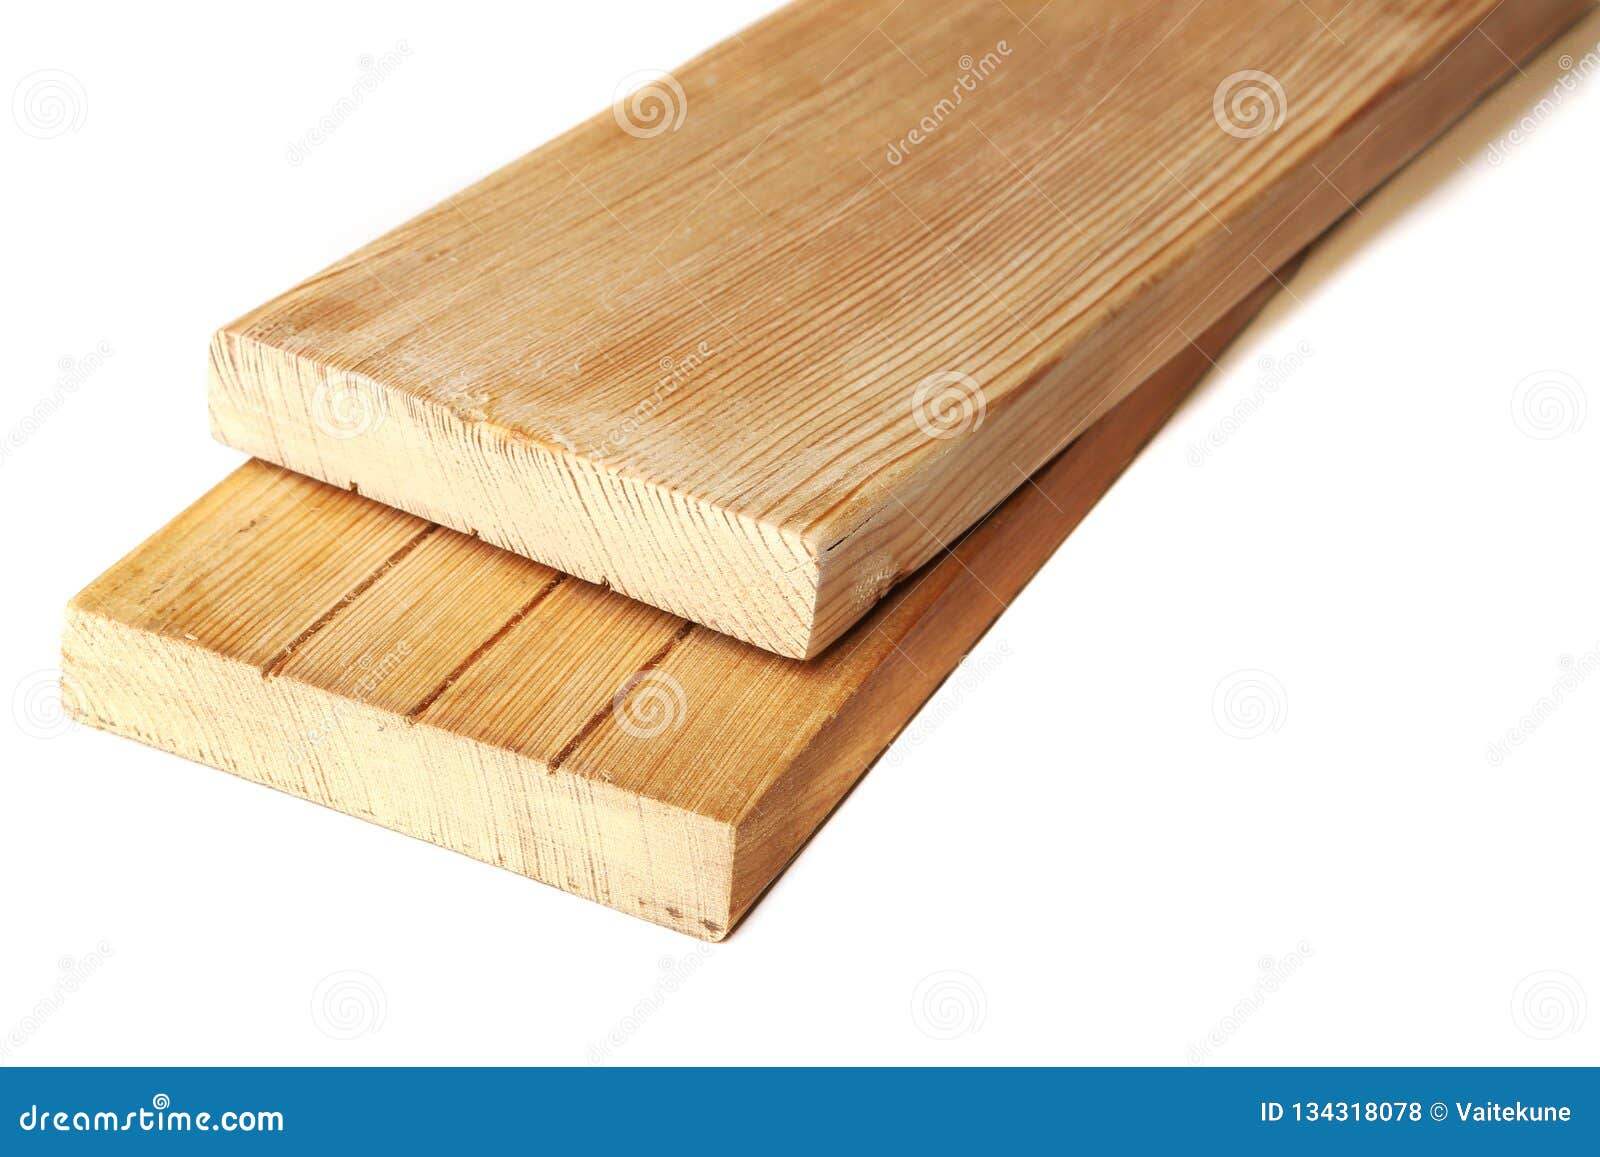 Larch Wood Plank Board Isolated on White Background.Two Larch